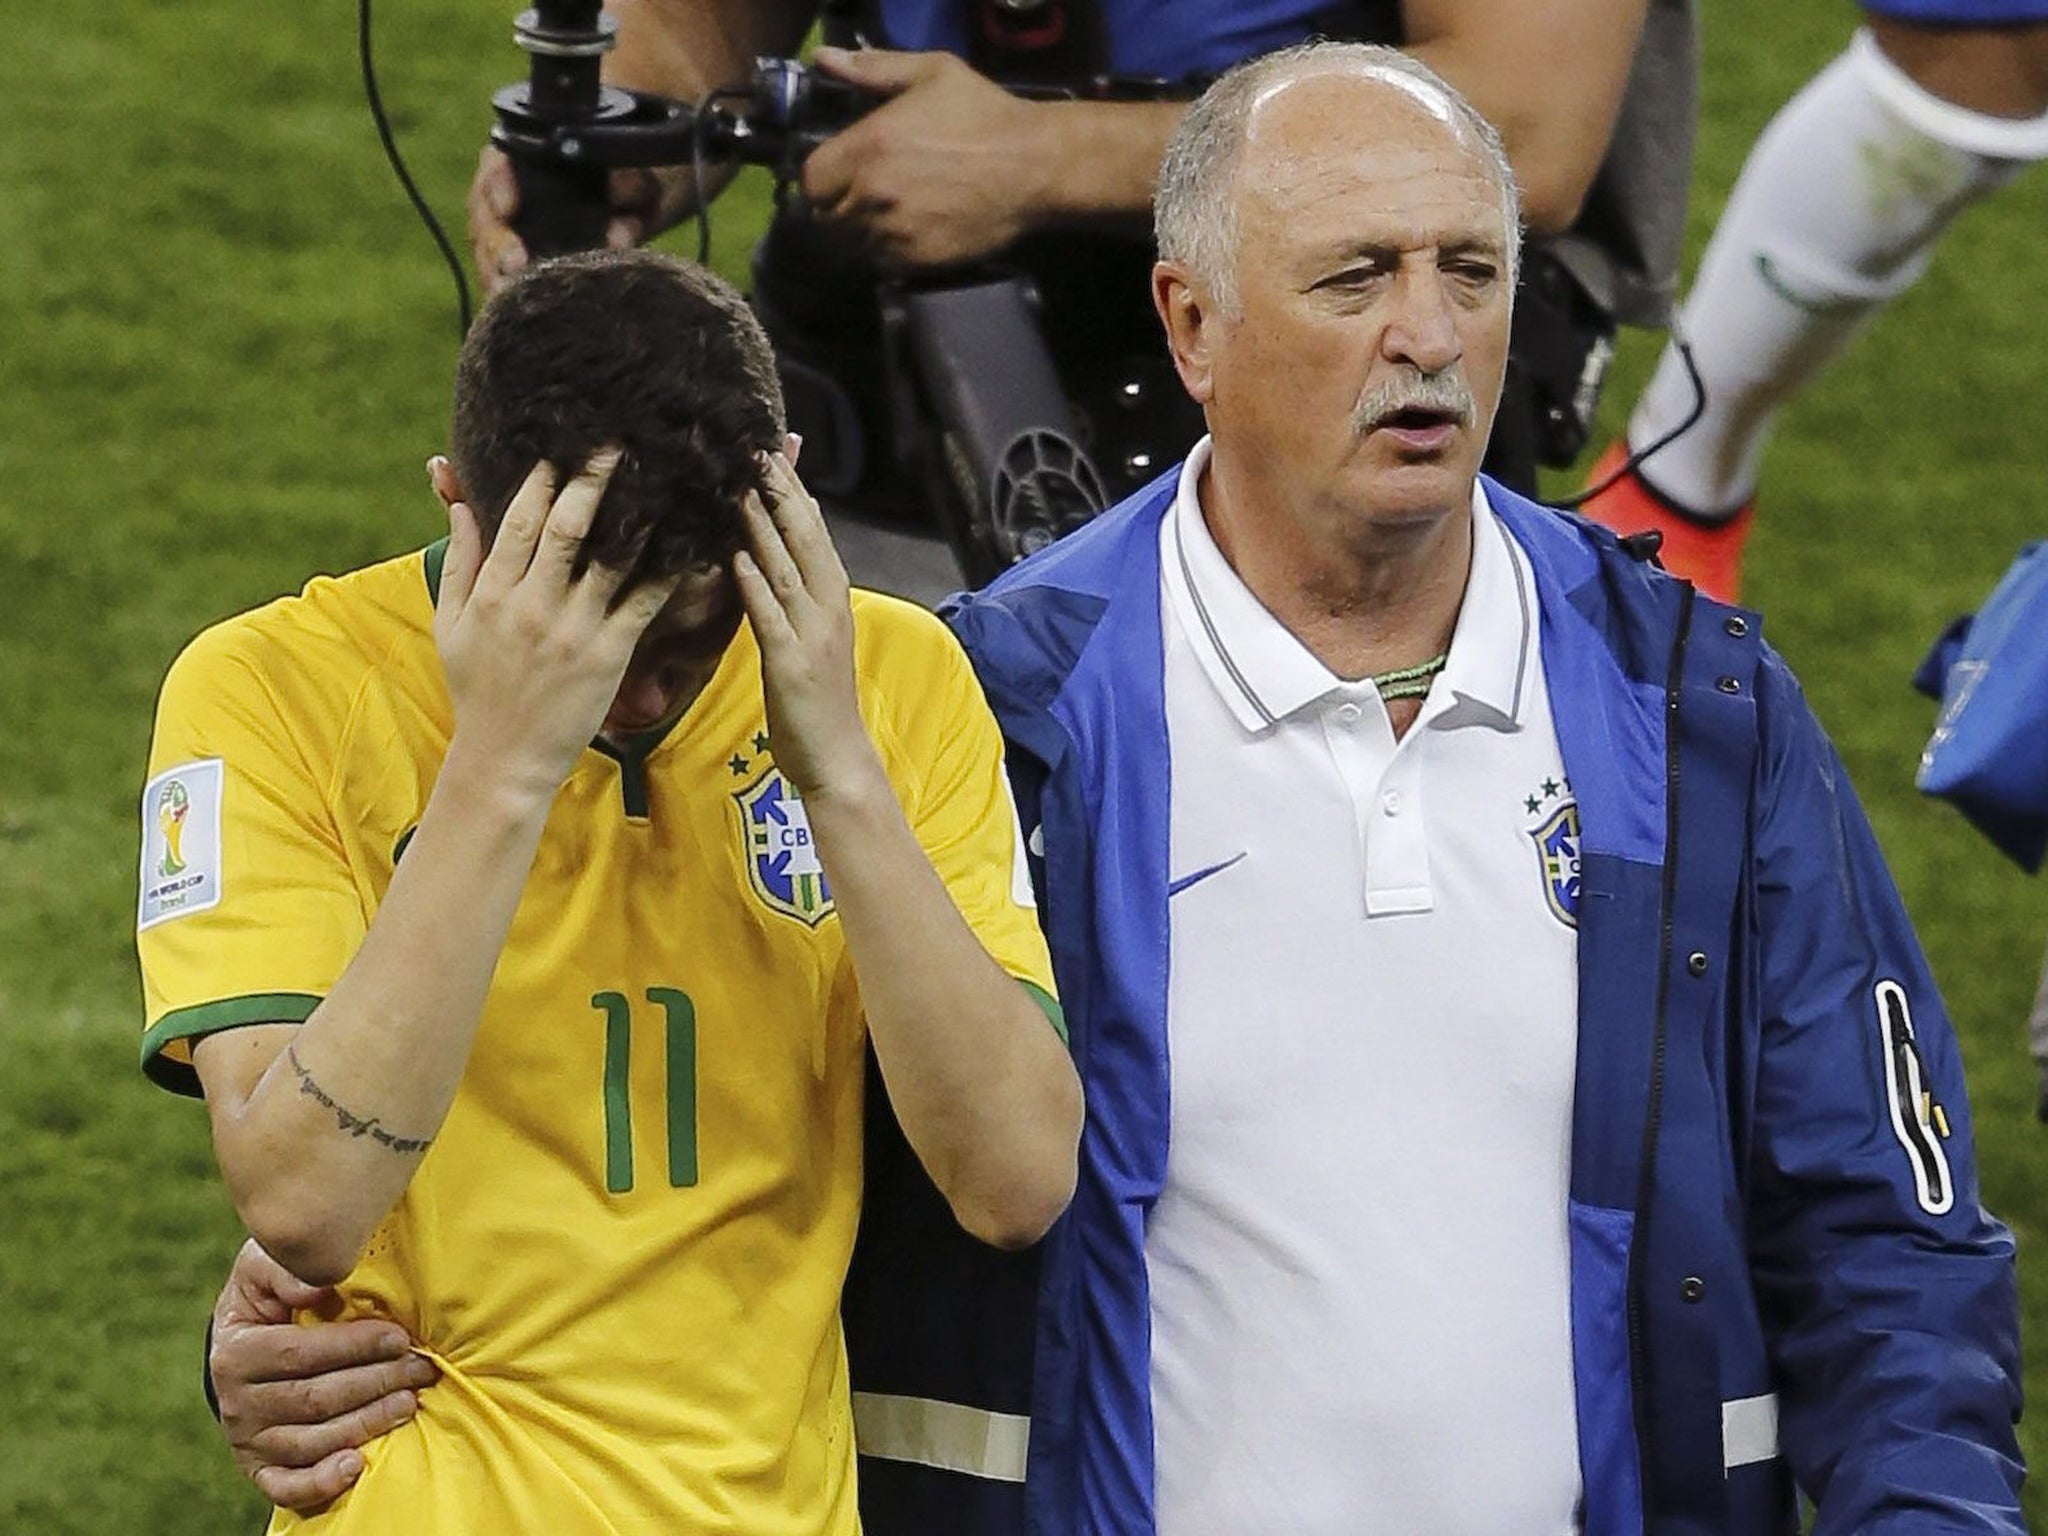 Brazil's head coach Luiz Felipe Scolari leads player Oscar off the pitch after the FIFA World Cup 2014 semi final match between Brazil and Germany at the Estadio Mineirao in Belo Horizonte, Brazil